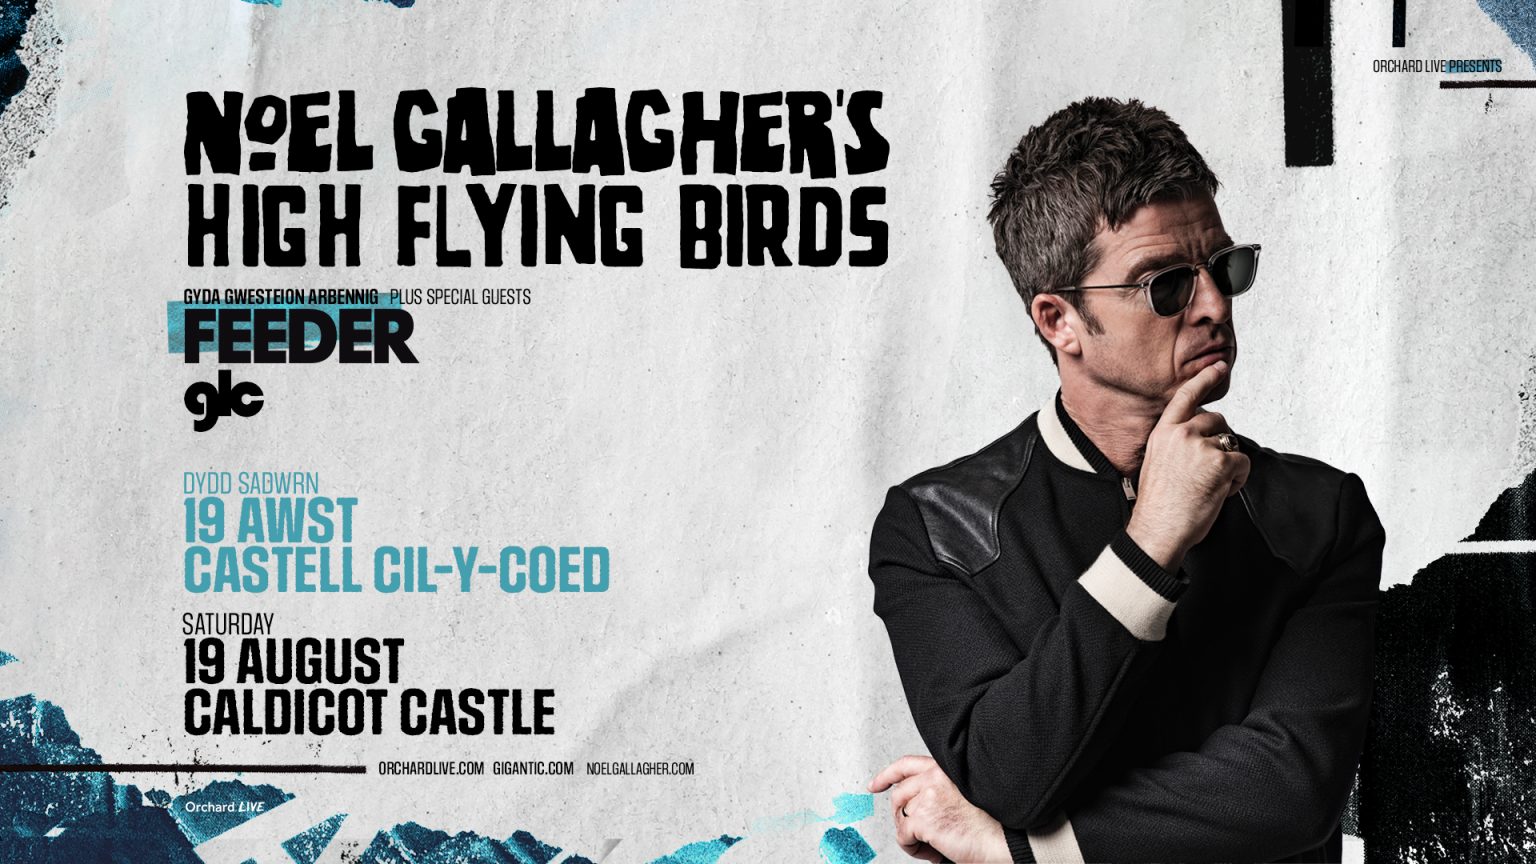 Noel Gallagher’s High Flying Birds to land on stage at Caldicot Castle